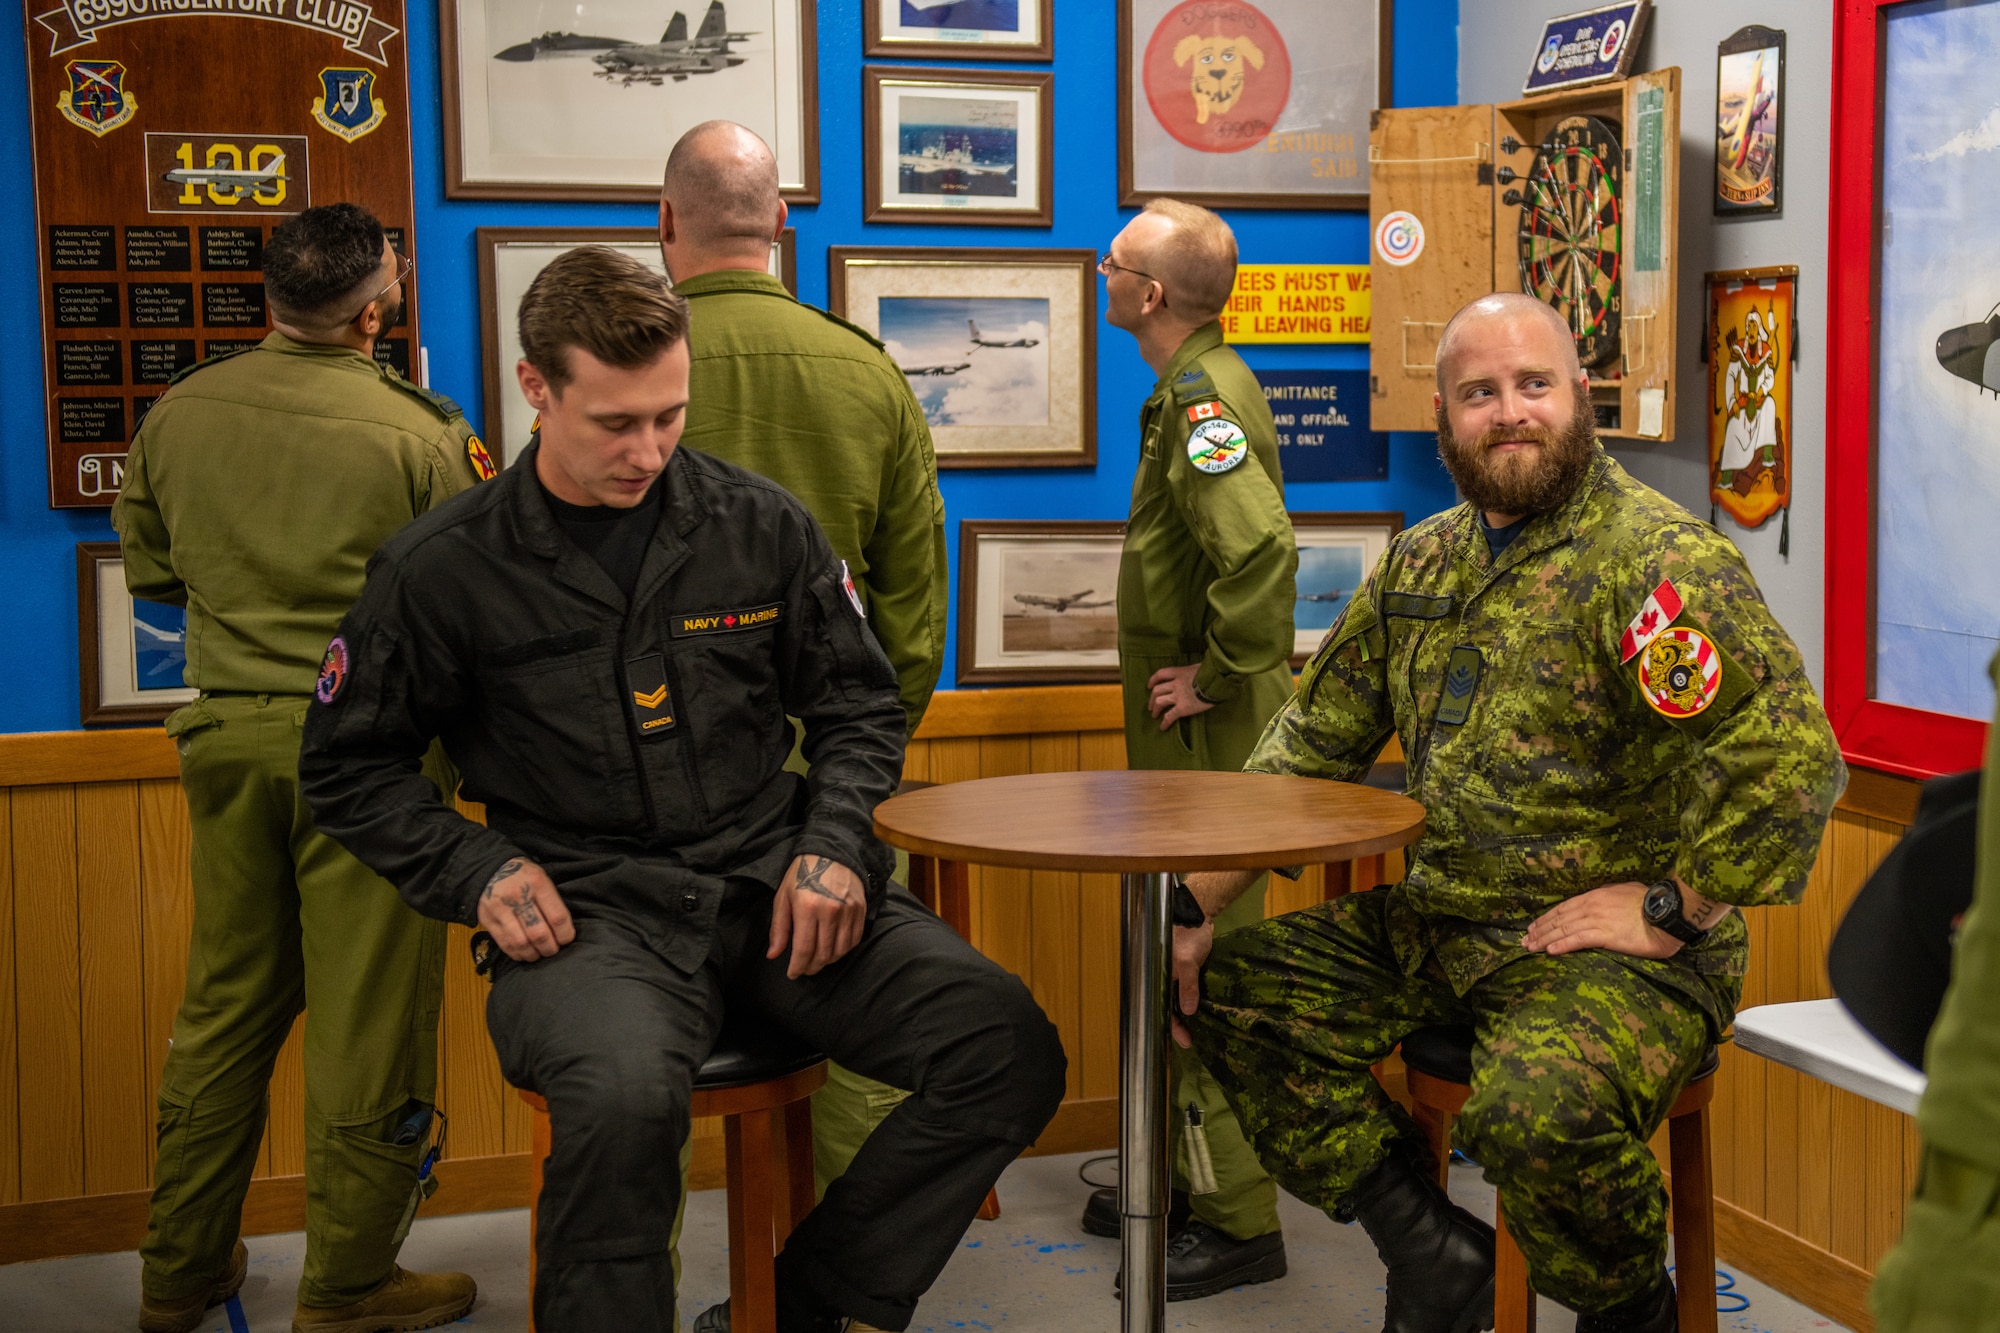 Canadian military members sit in the heritage room of a U.S. Air Force squadron